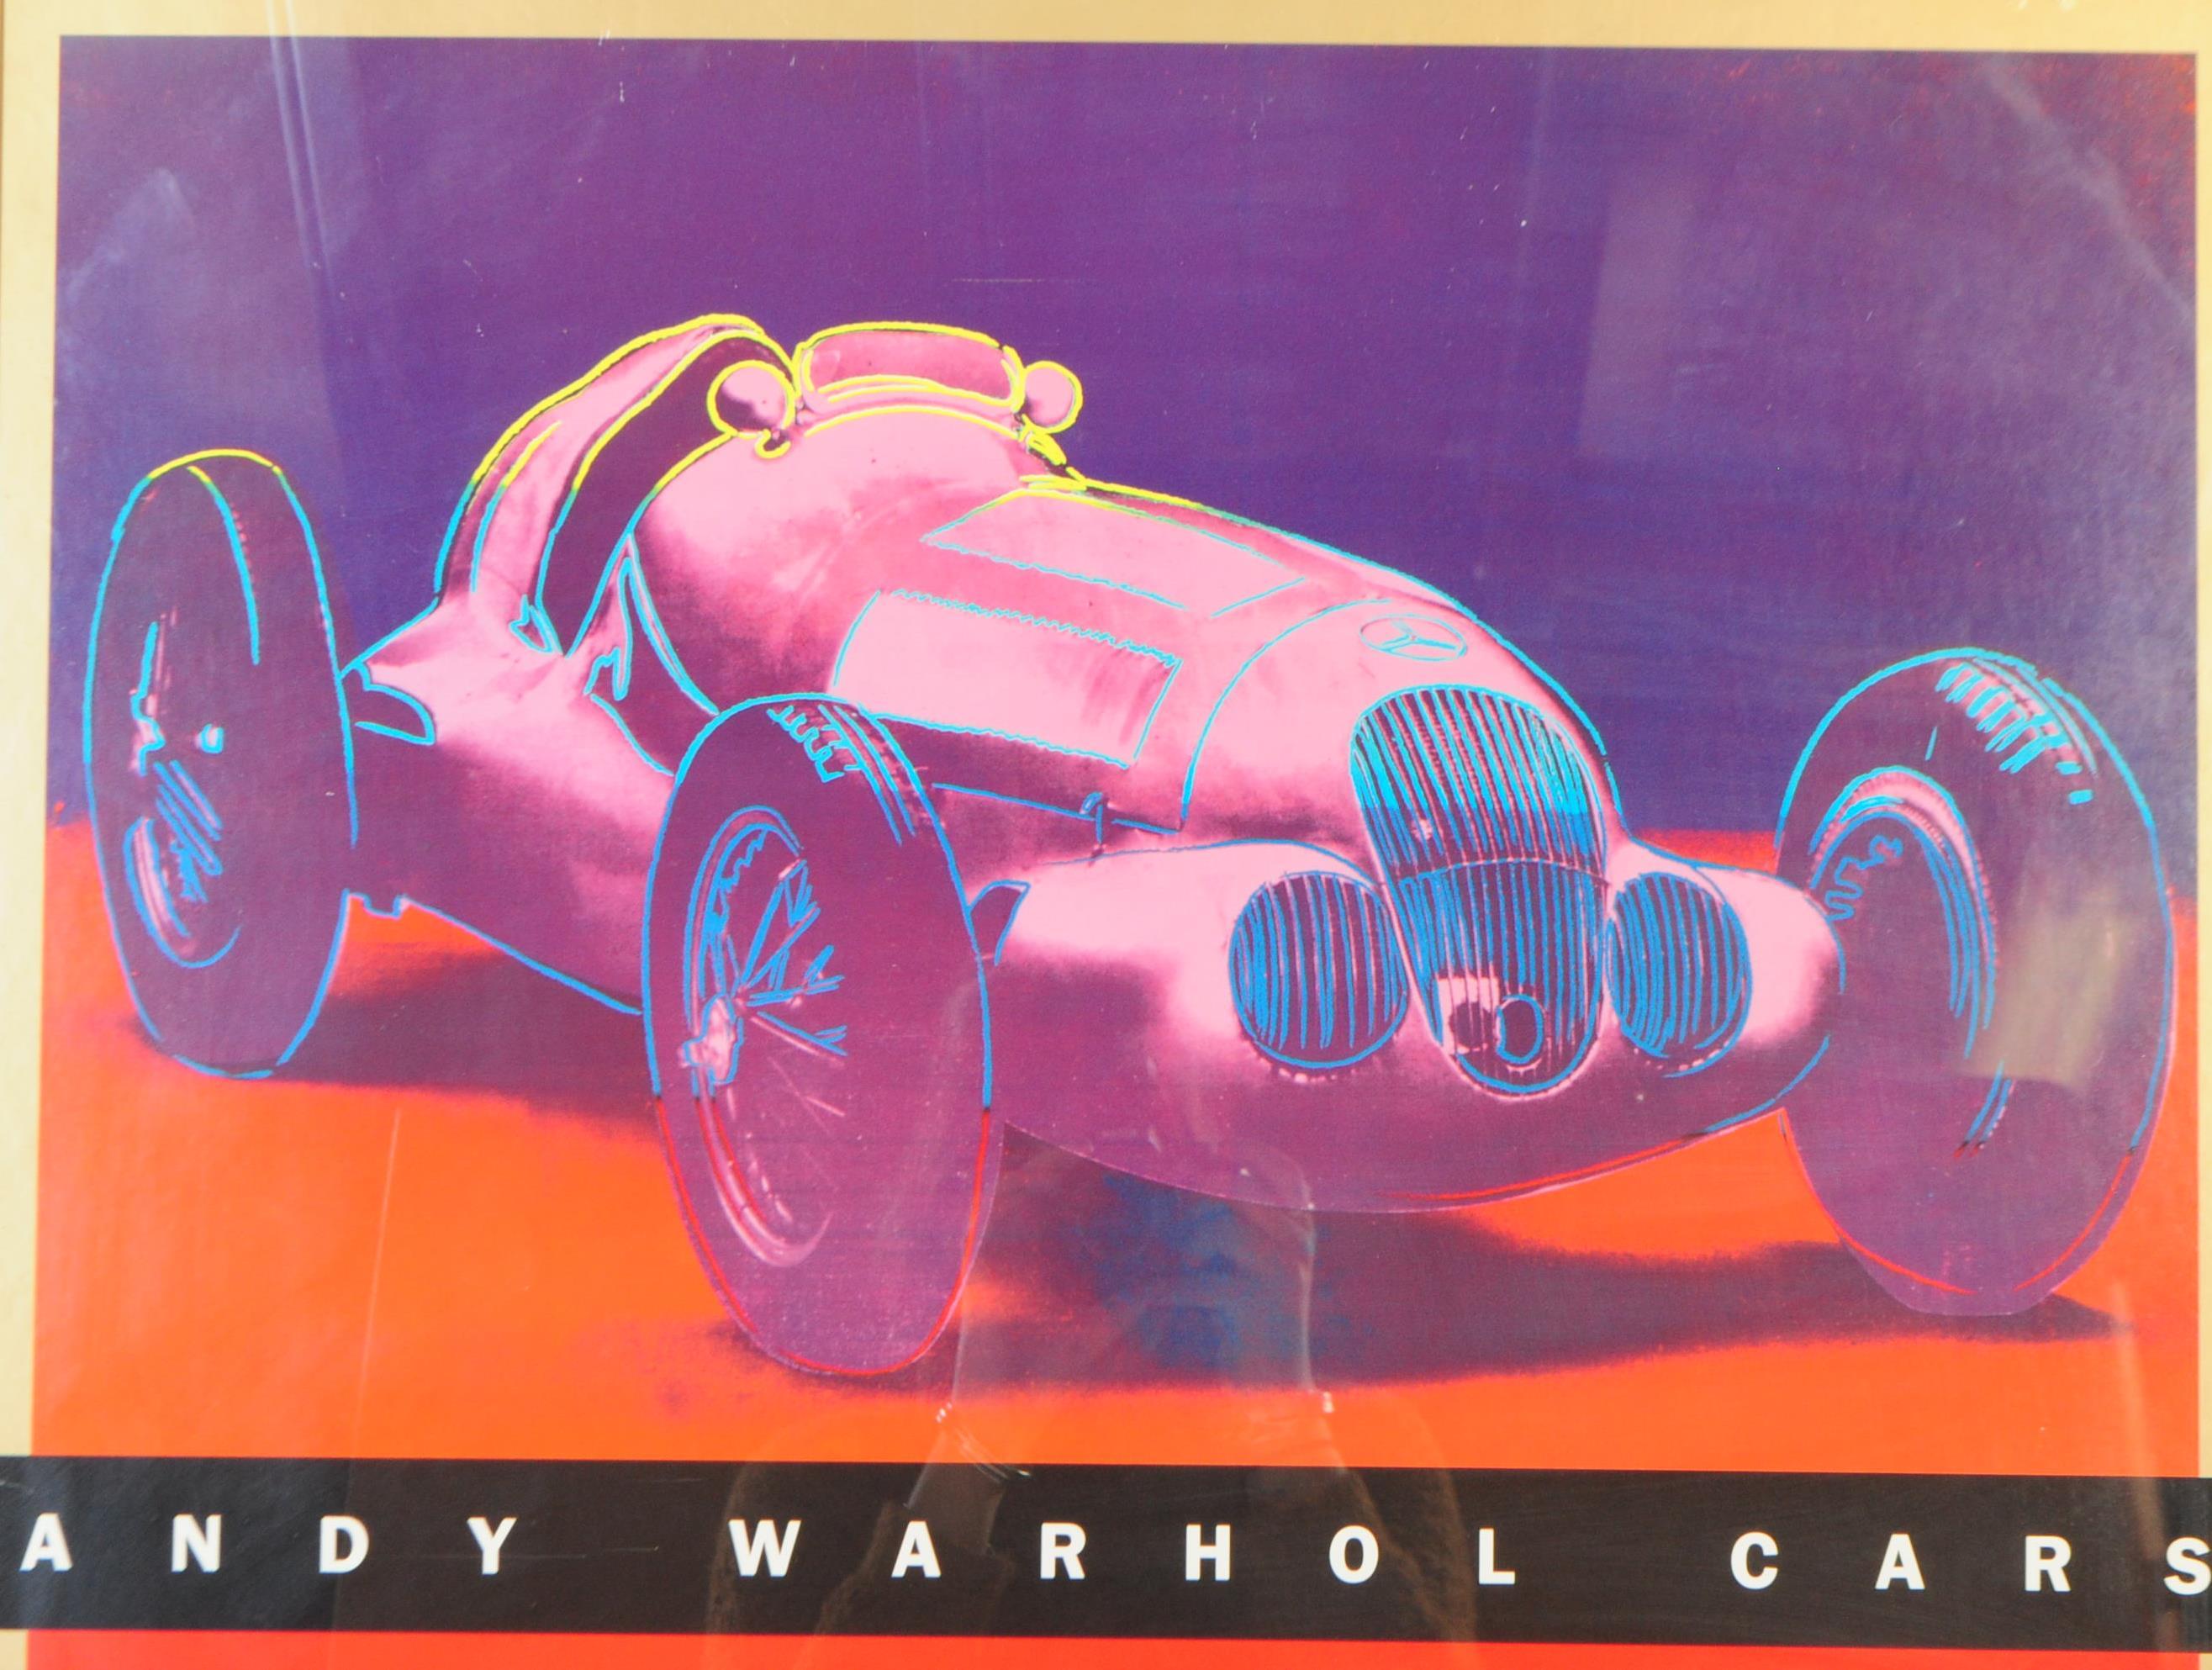 ANDY WARHOL CARS 1988 GUGGENHEIM EXHIBITION POSTER - Image 3 of 6